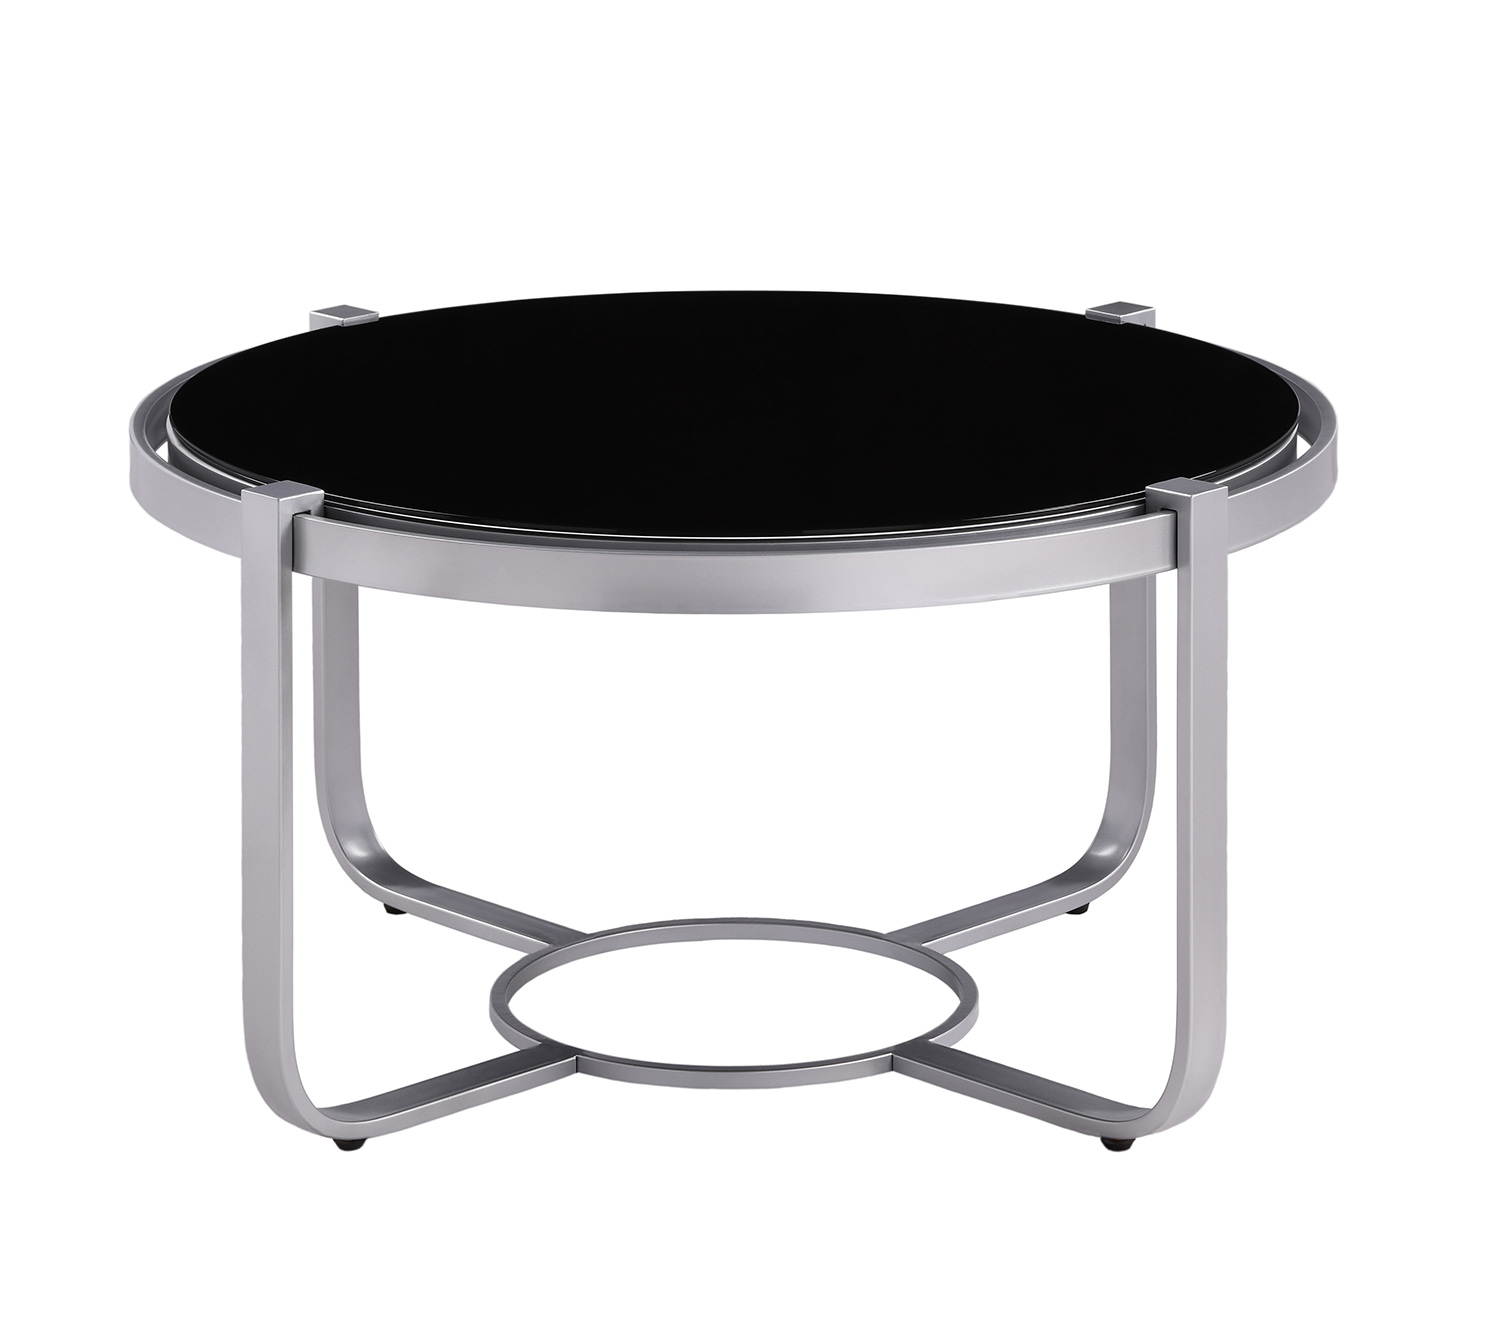 Homelegance Caracal Round Cocktail Table with Black Glass Insert - Silver